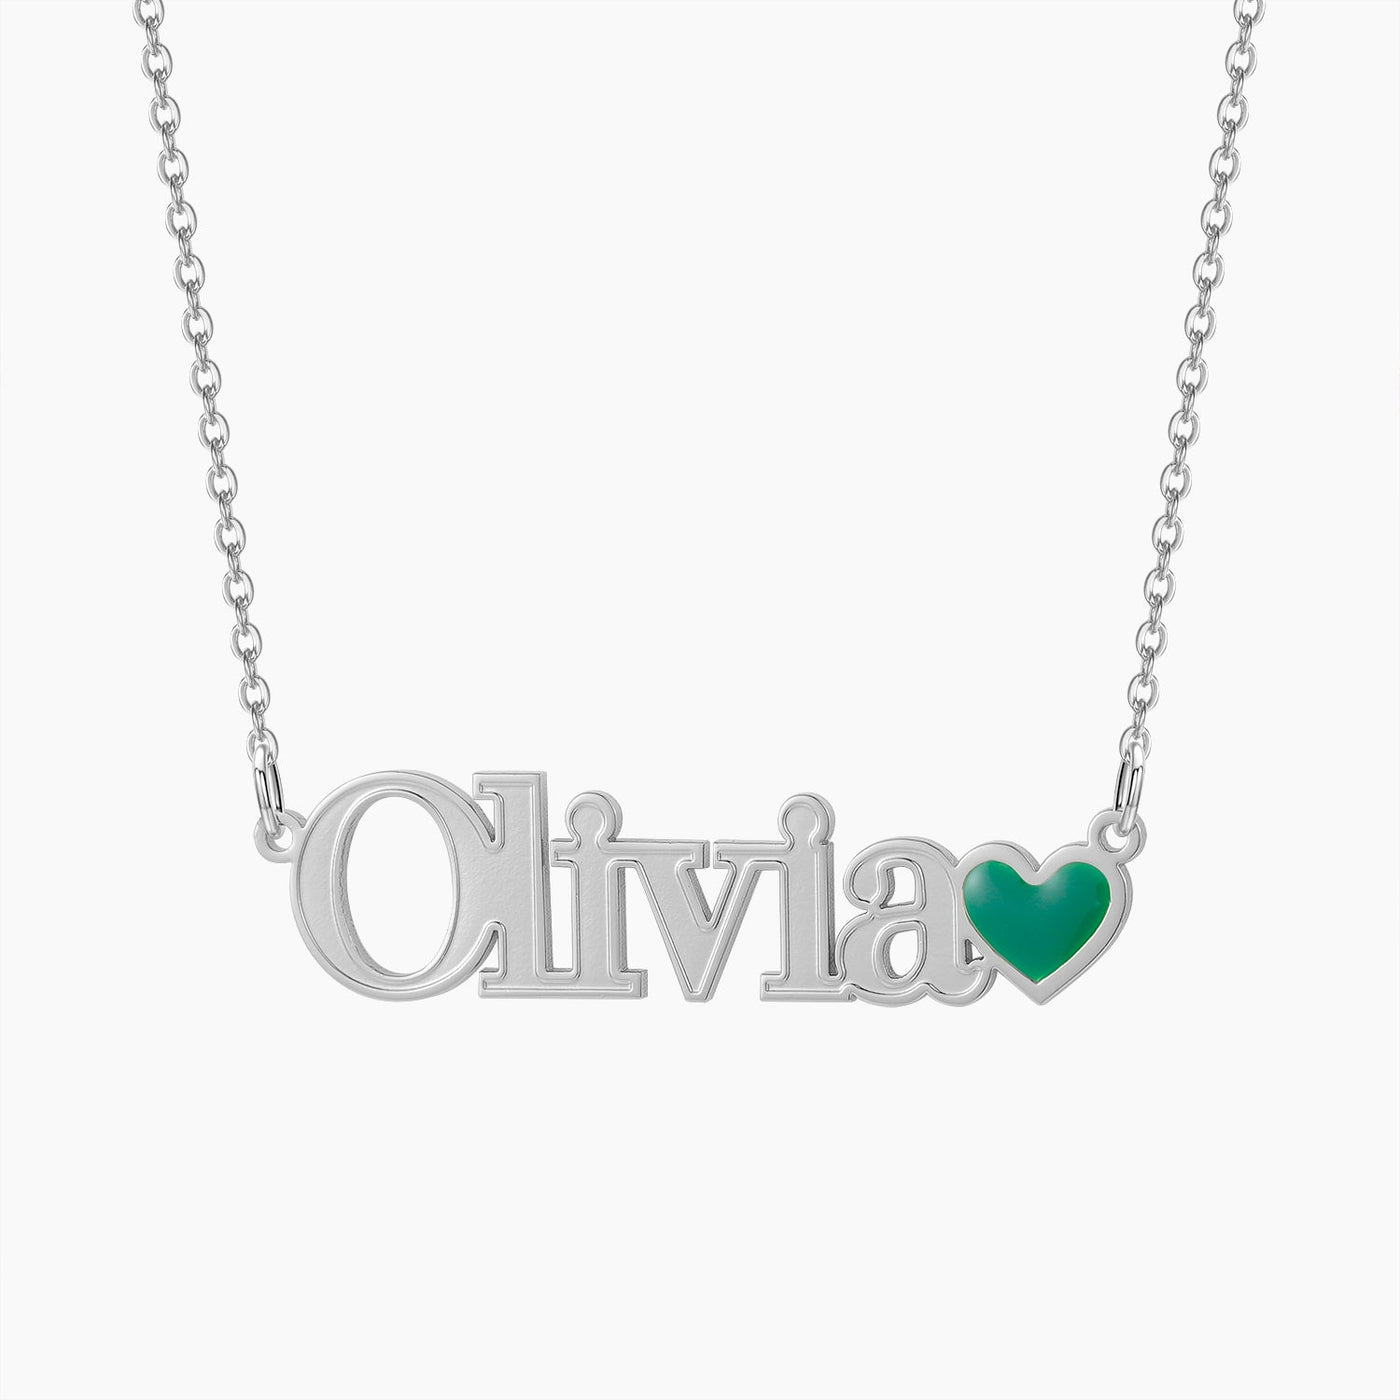 I just want a Rollie - Custom Heart Necklace - HouseofLx-18K White Gold